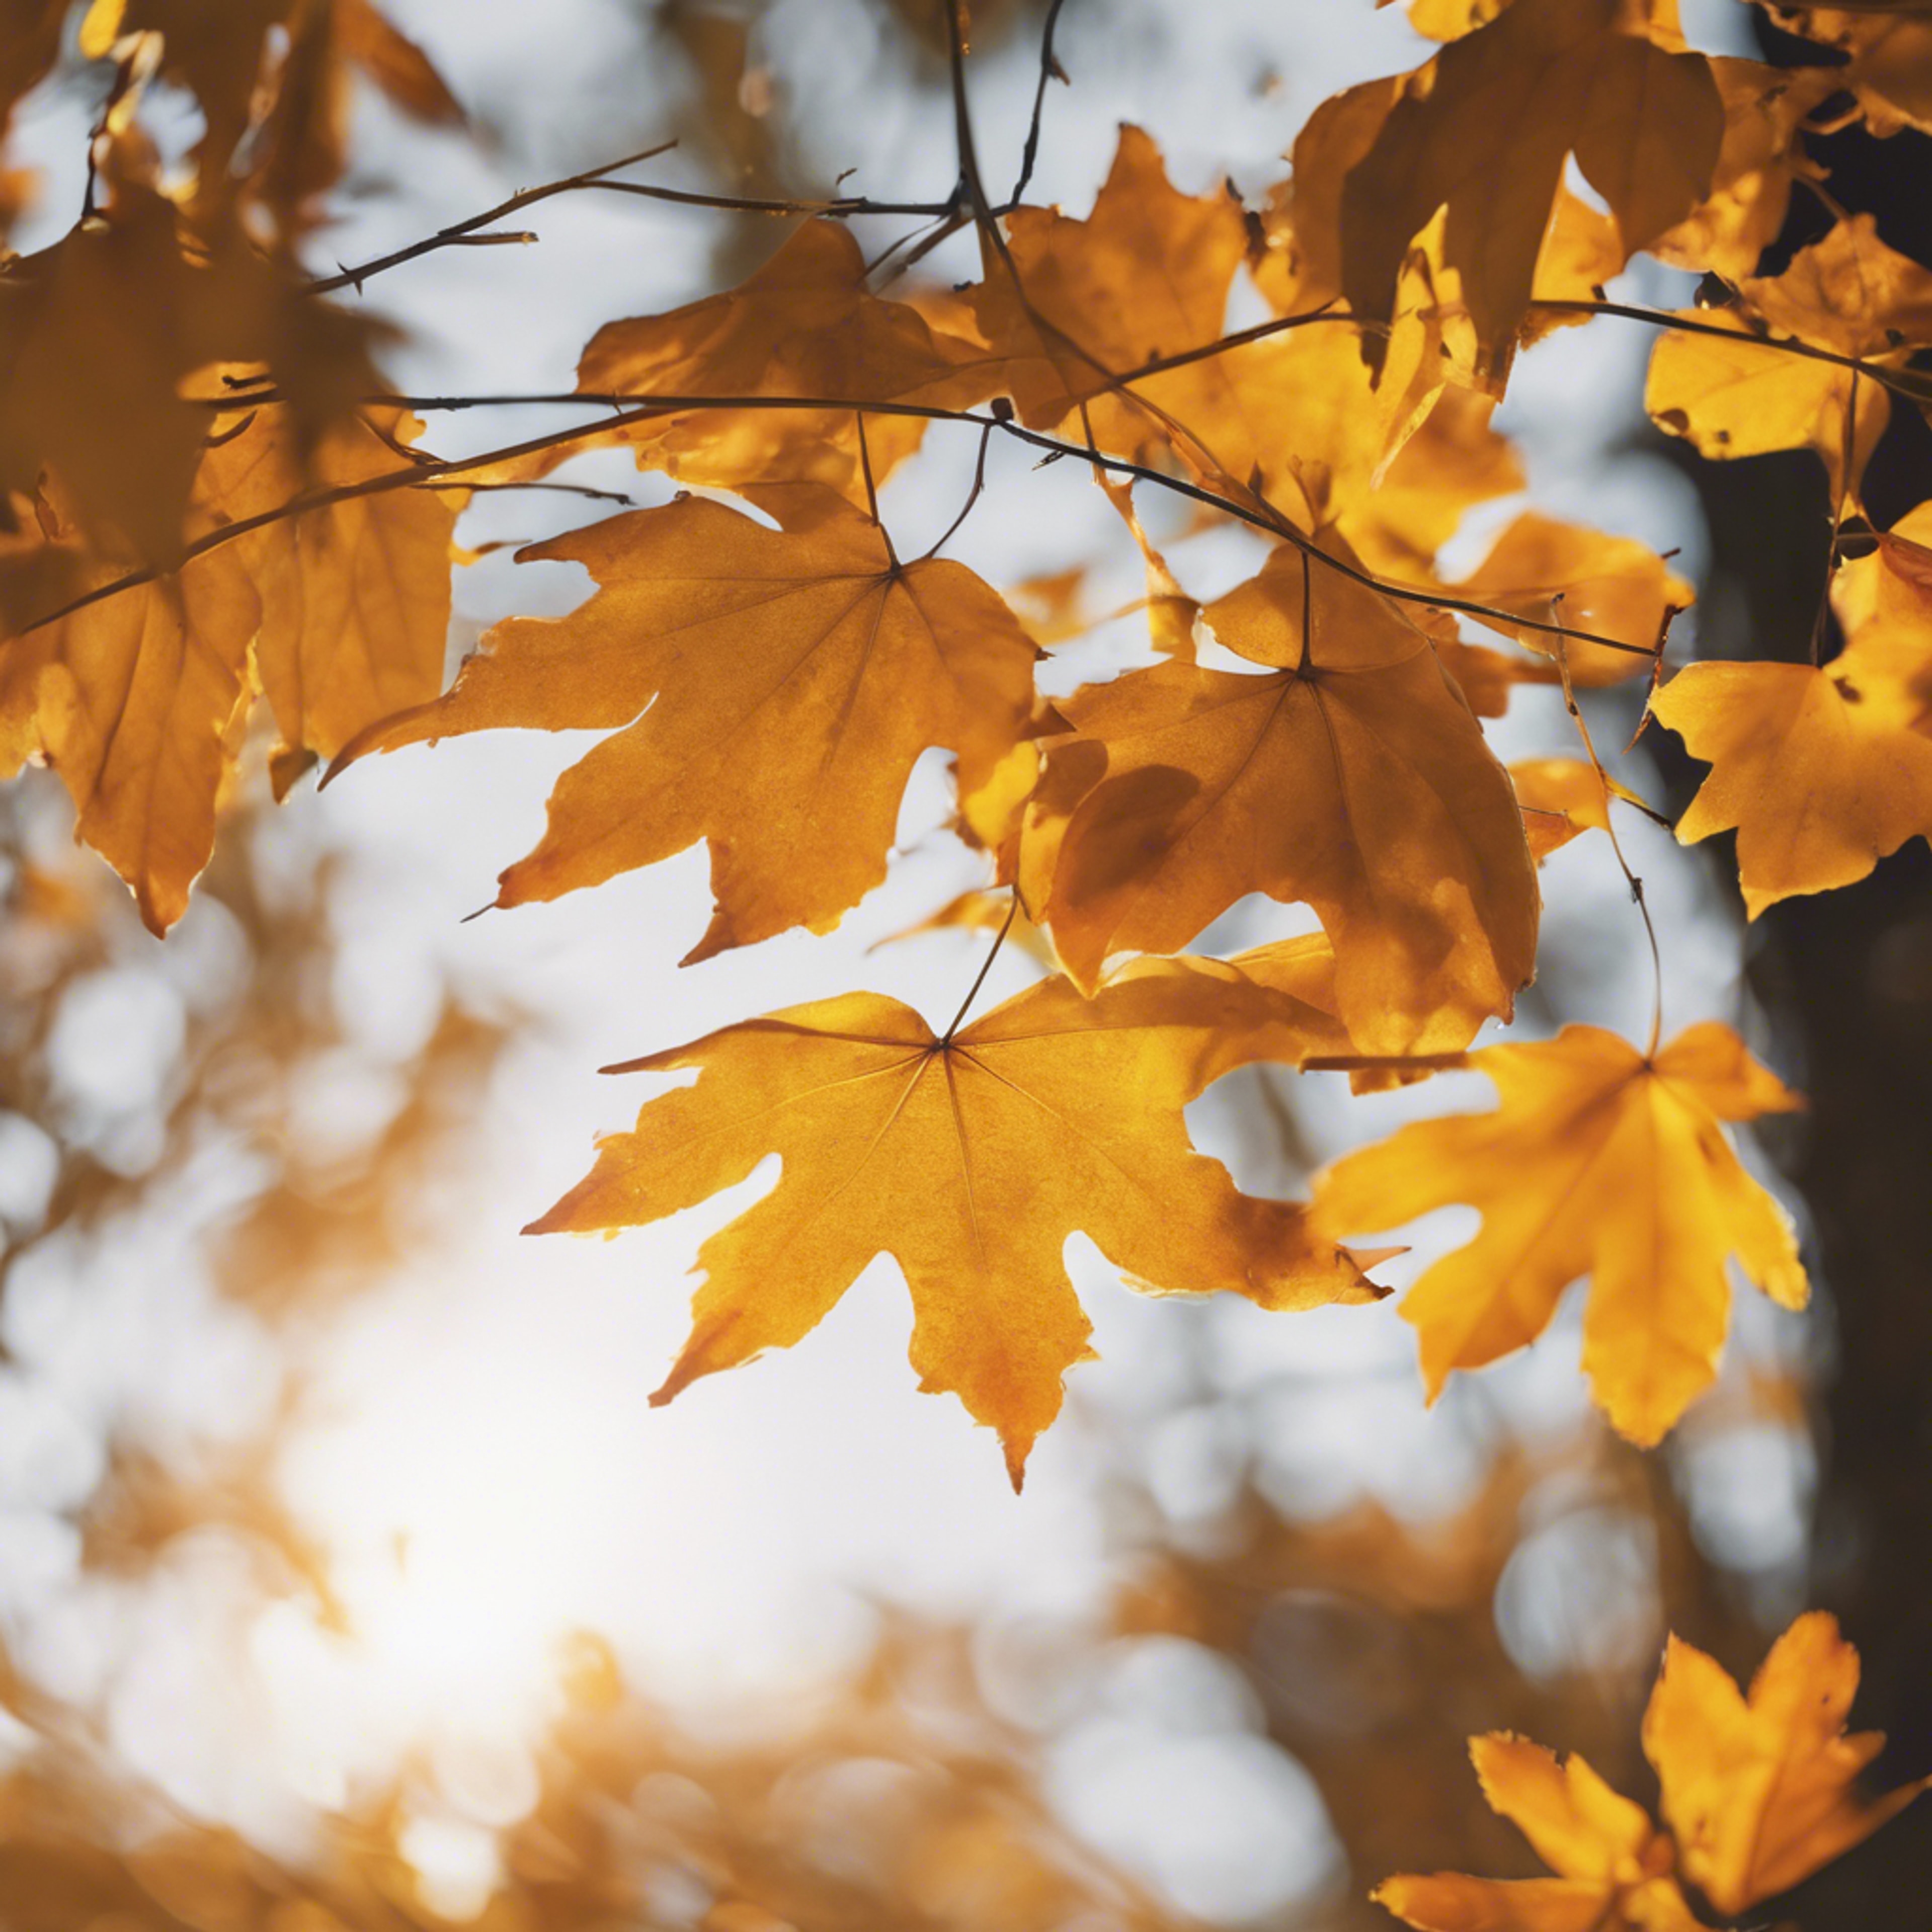 A close look at yellow-orange fall leaves, with the light streaming through. Tapéta[f7b27726e627433697dc]